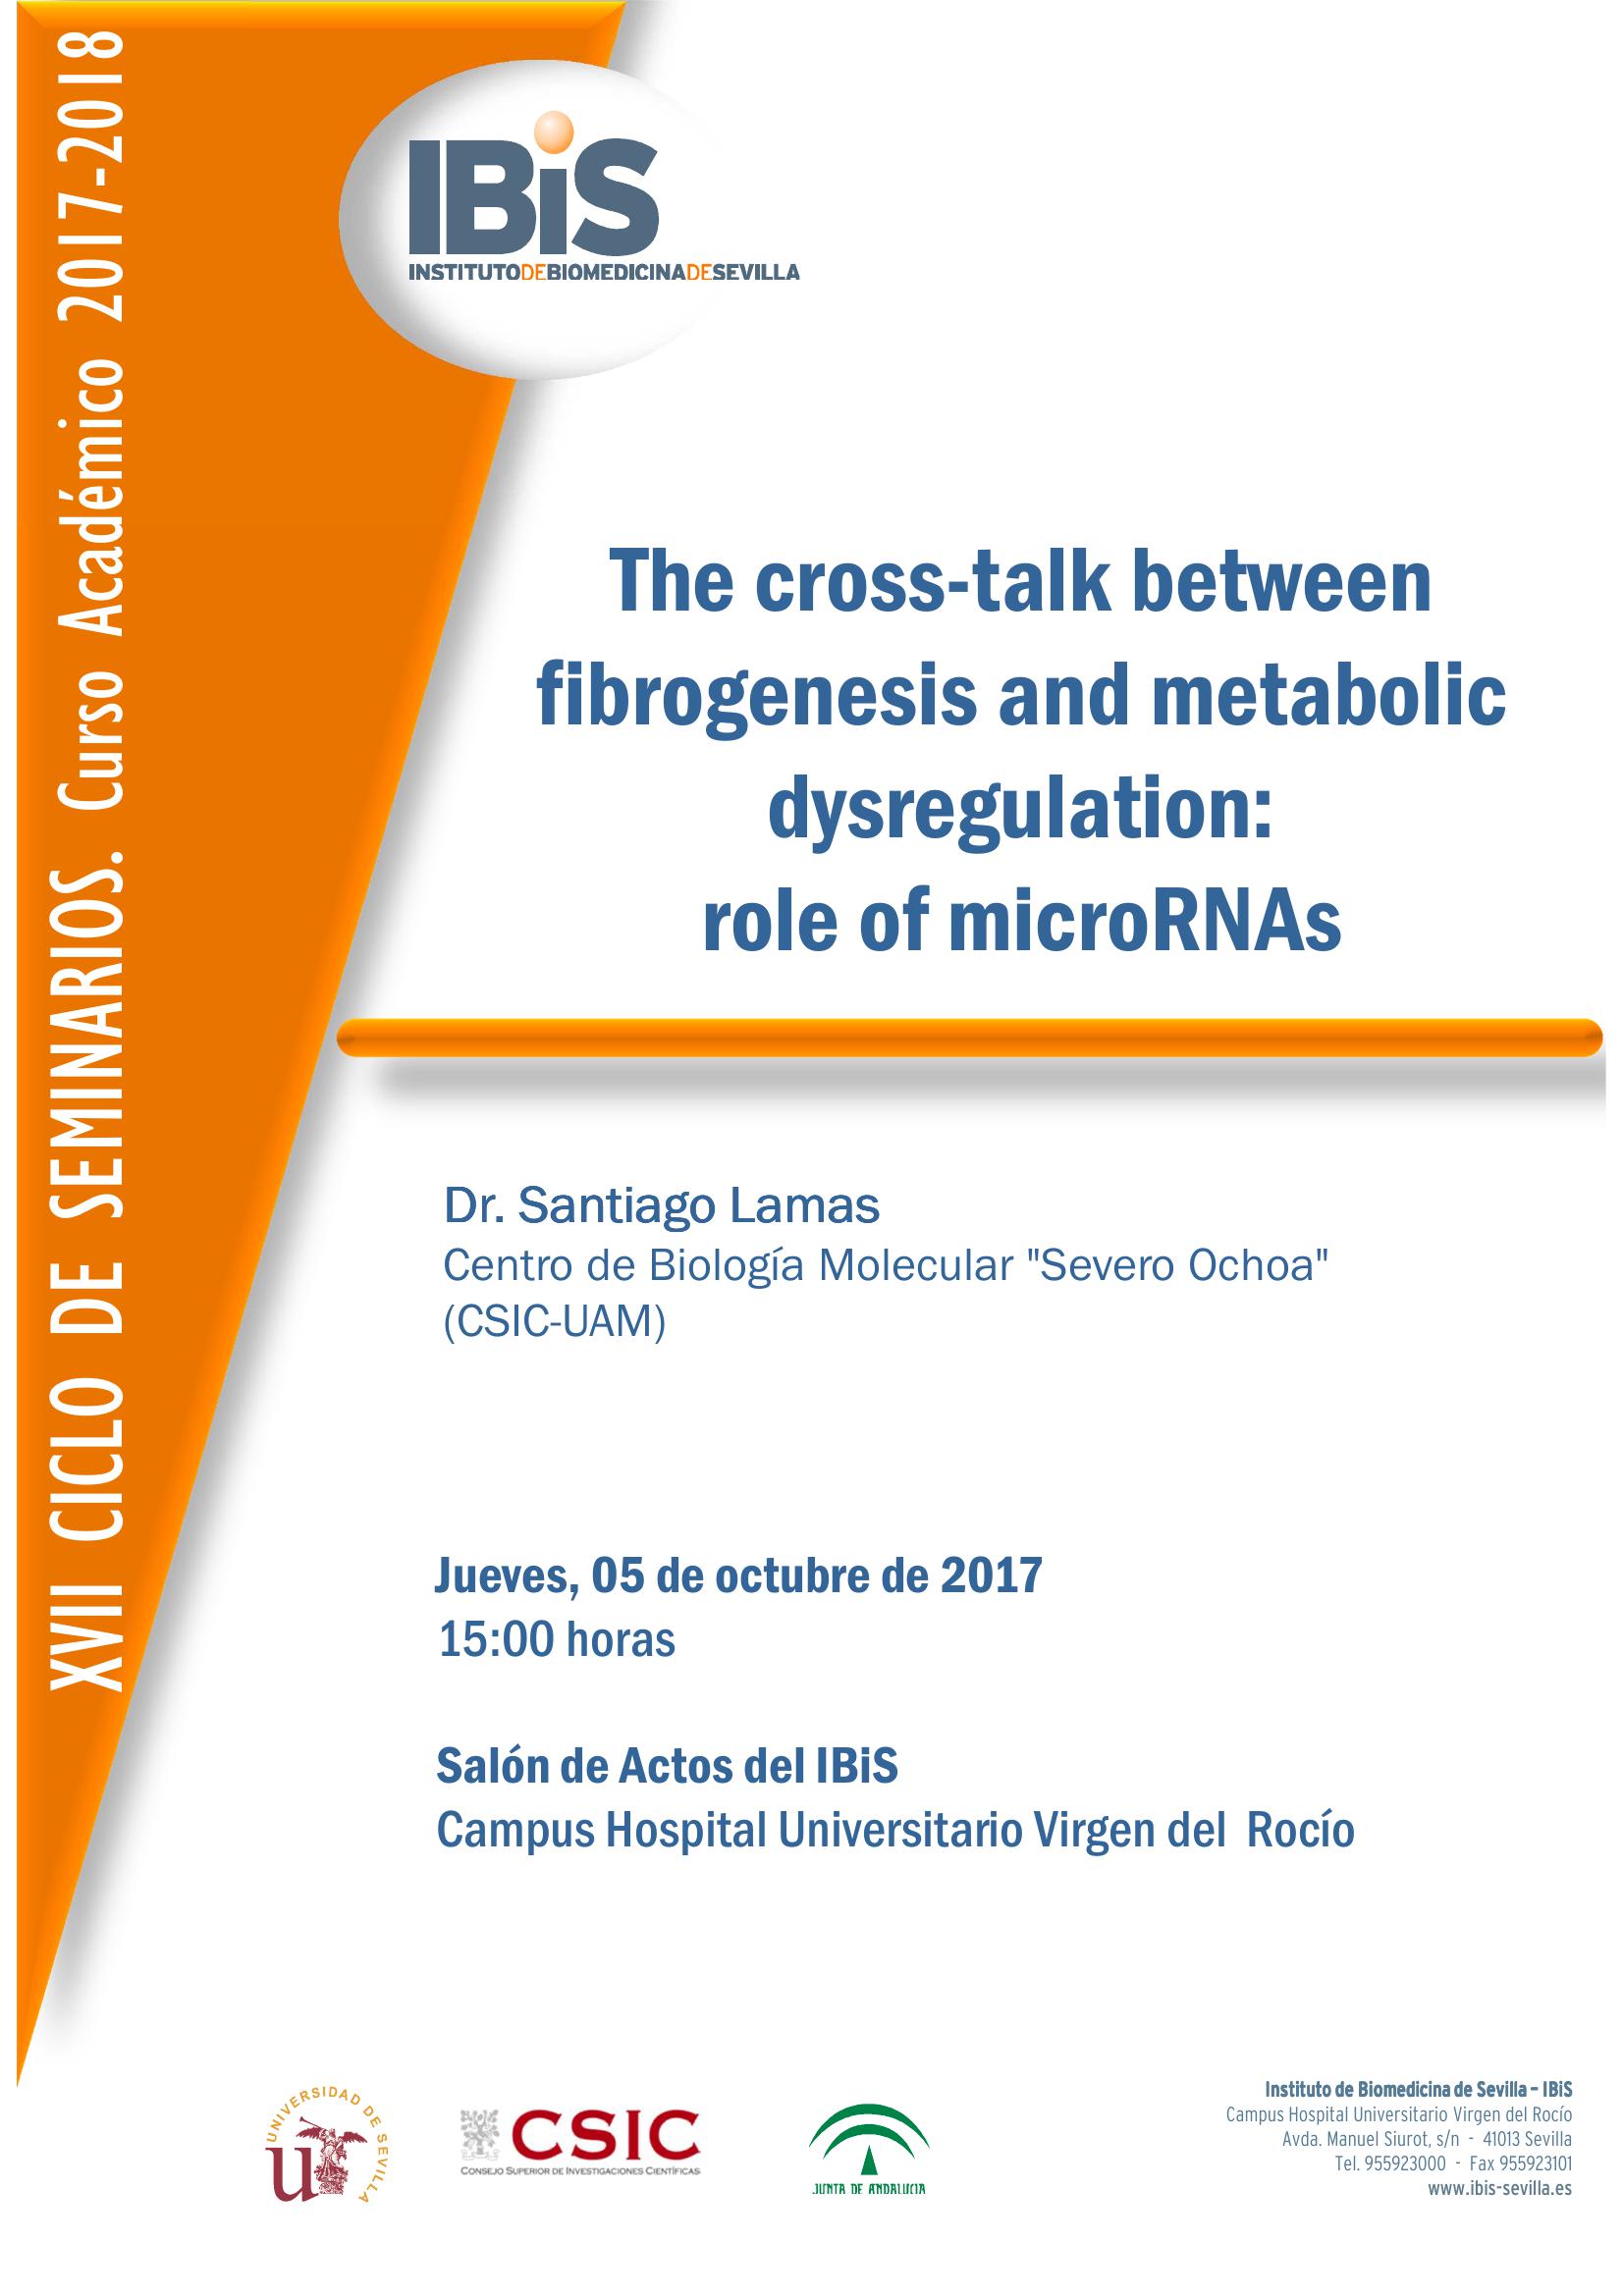 Poster: The cross-talk between fibrogenesis and metabolic dysregulation: role of microRNAs